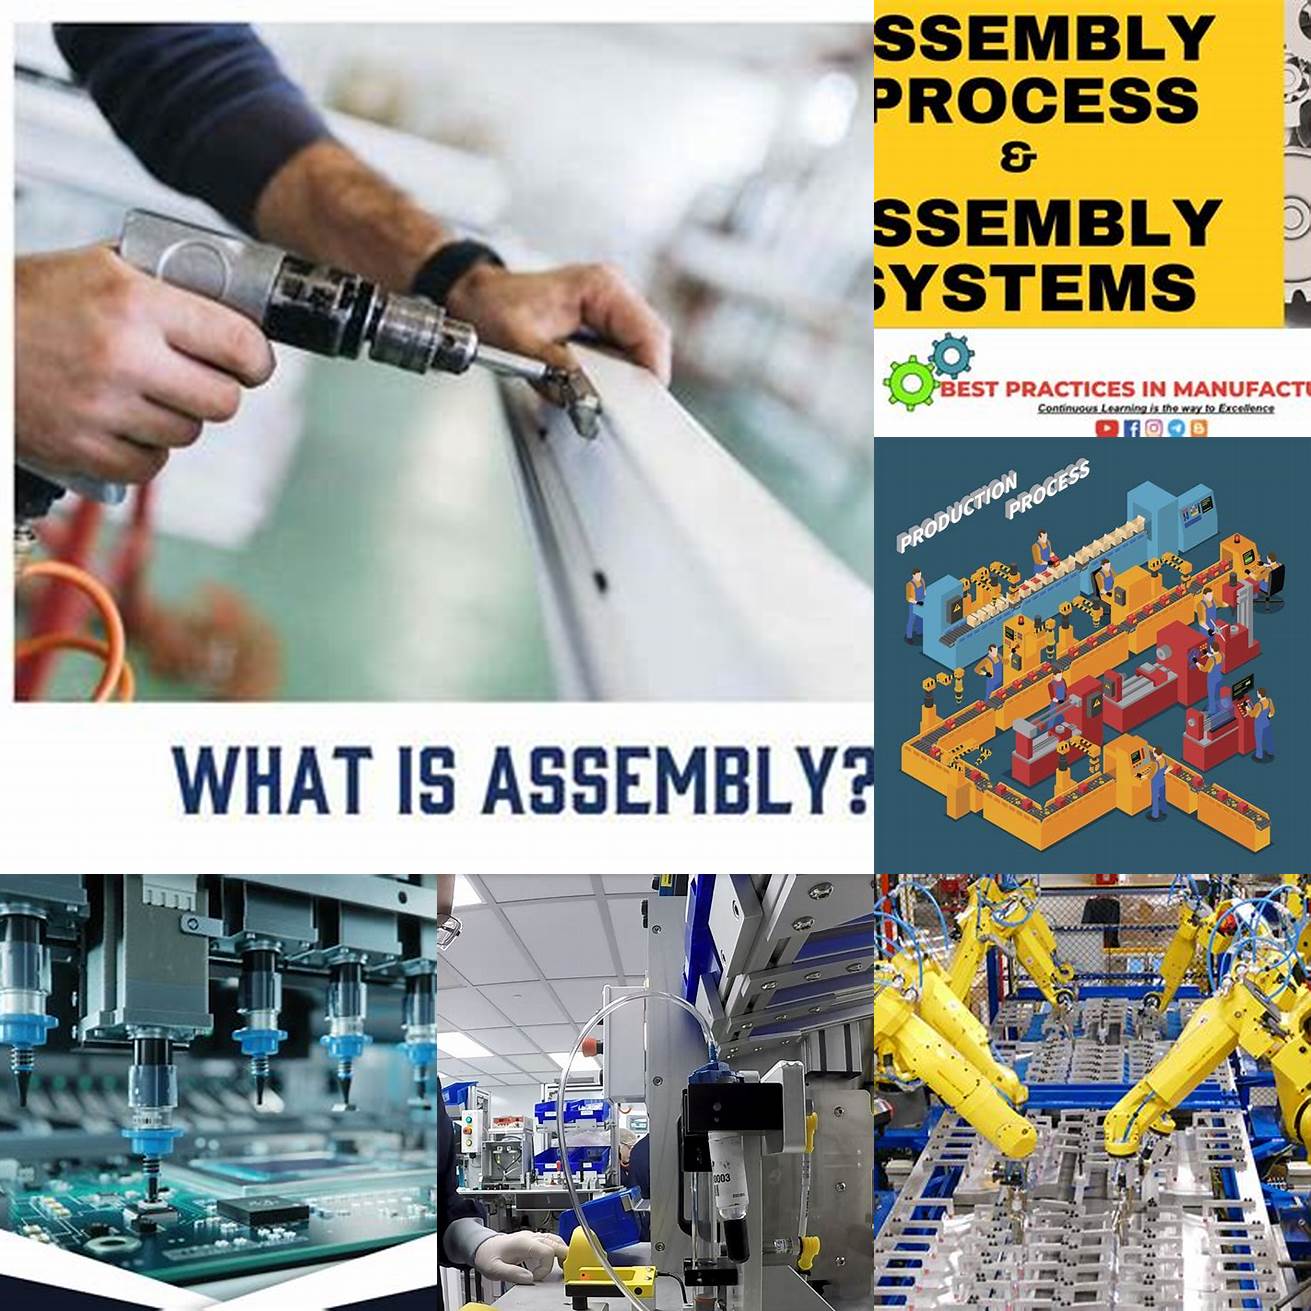 Image of the assembly process